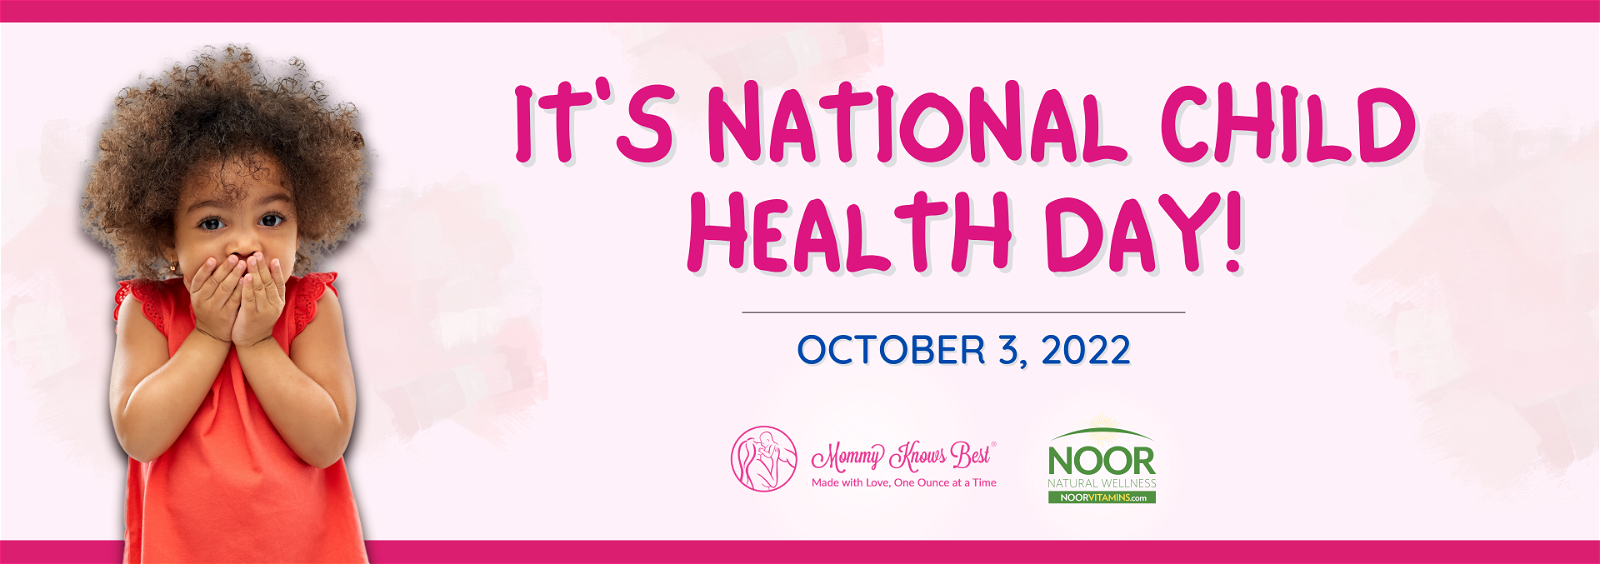 It's National Child Health Day! October 3, 2022